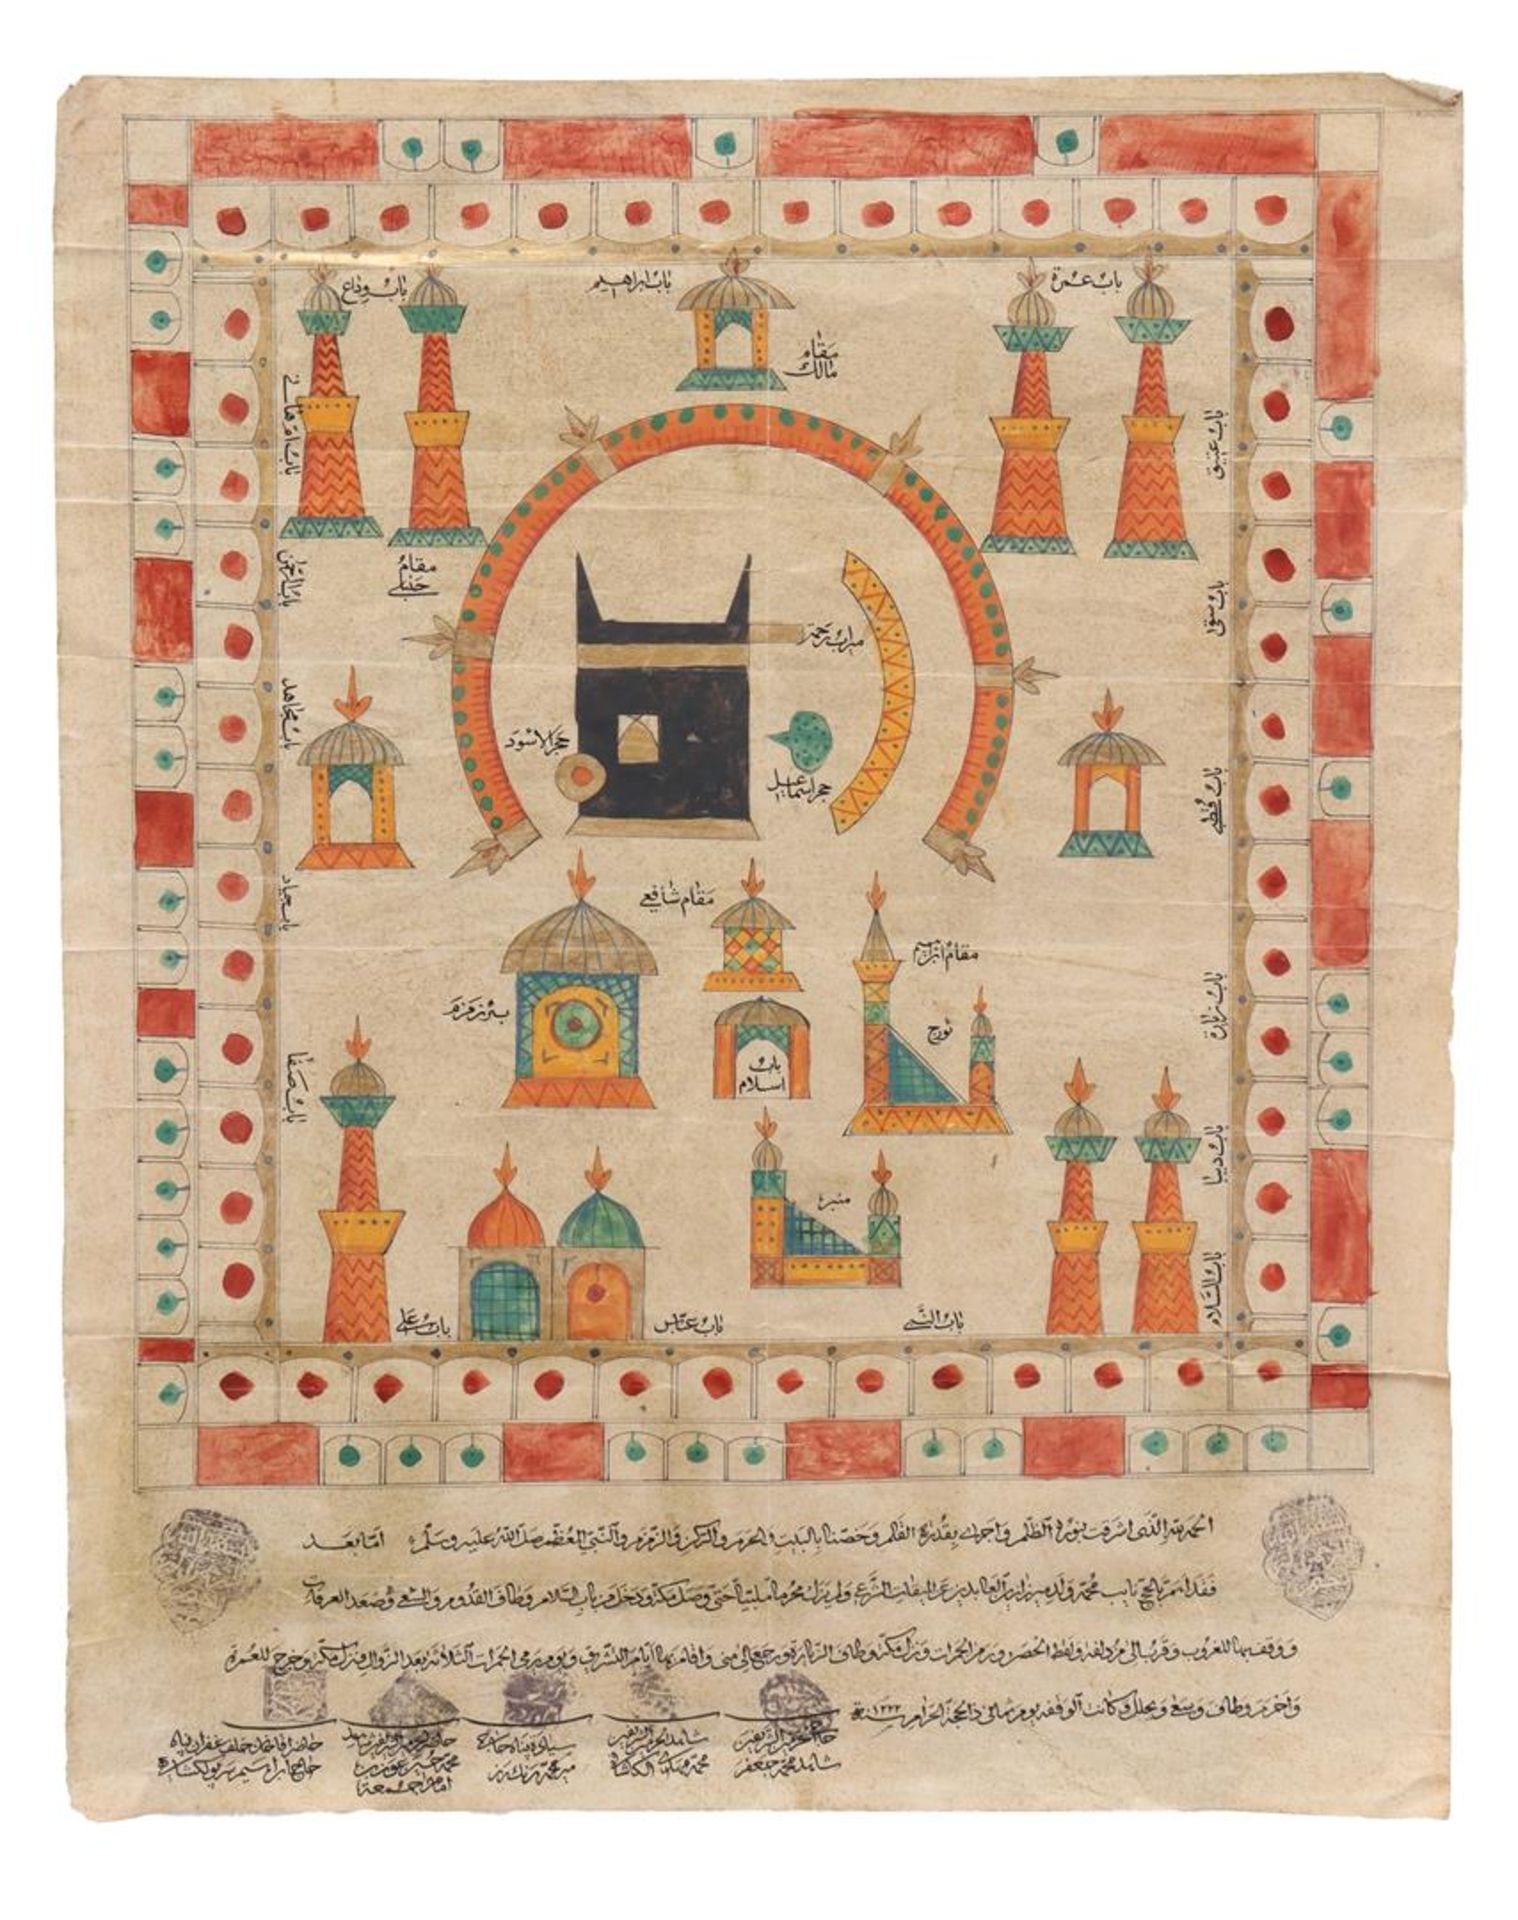 Depiction of pilgrimage to Mecca